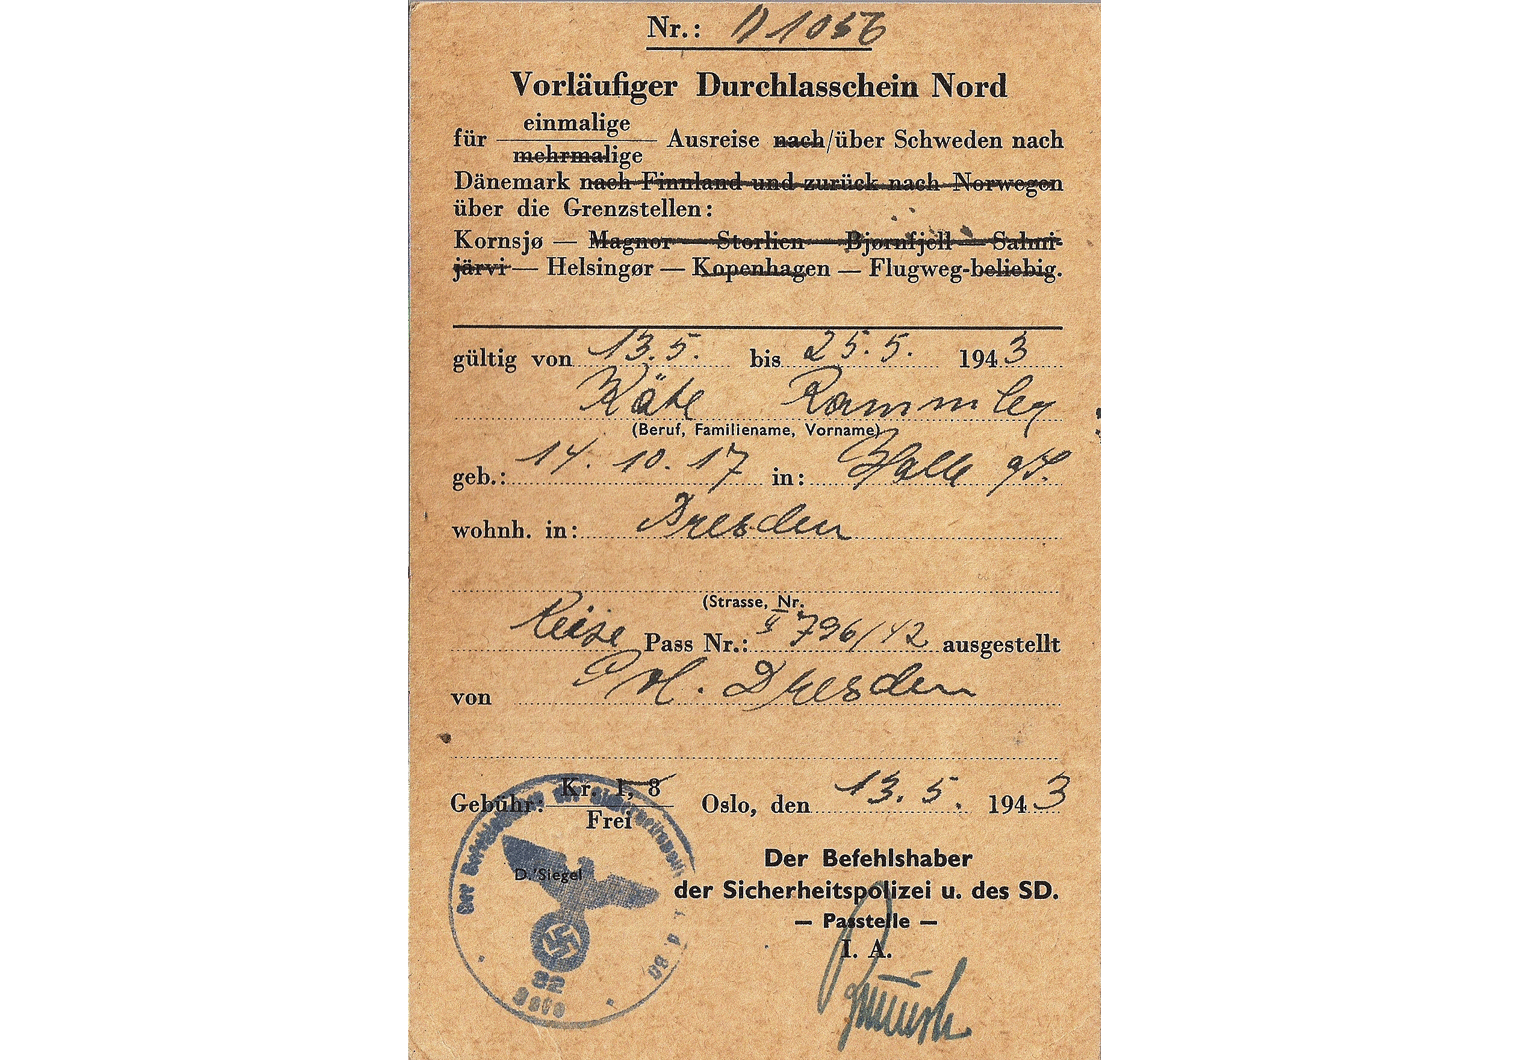 SS & SD travel document